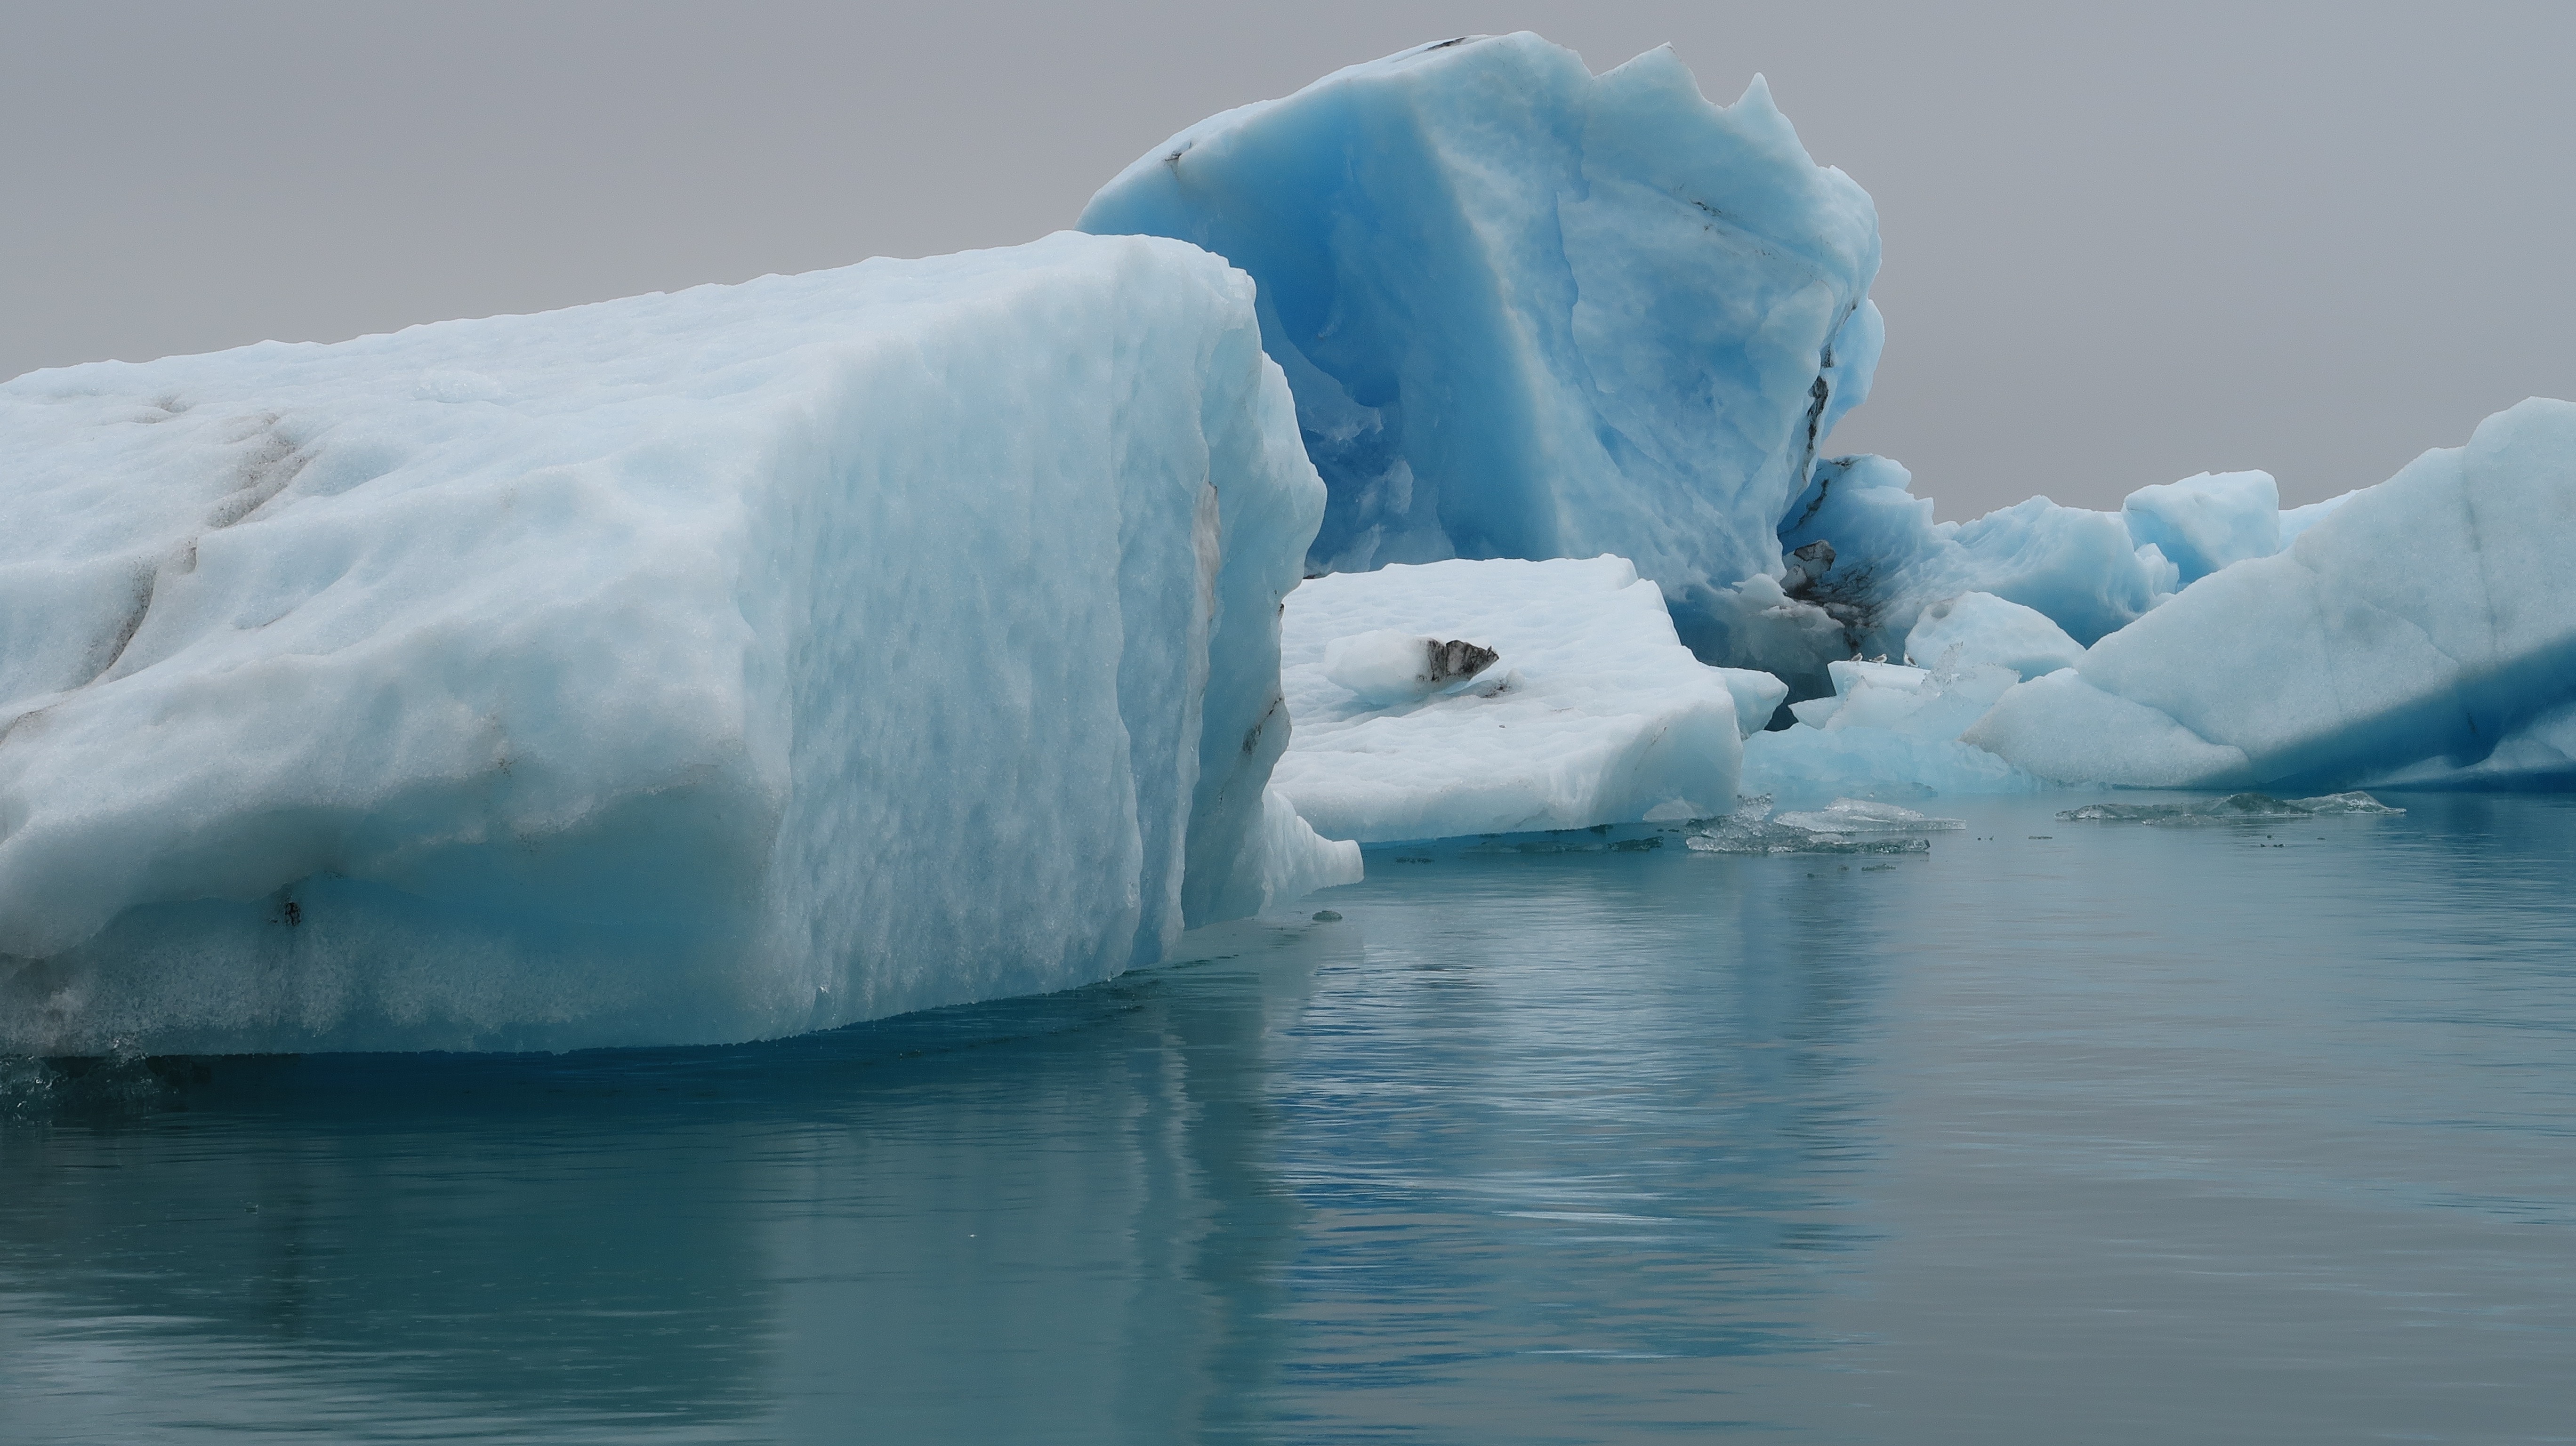 ice berg in the middle of body of water